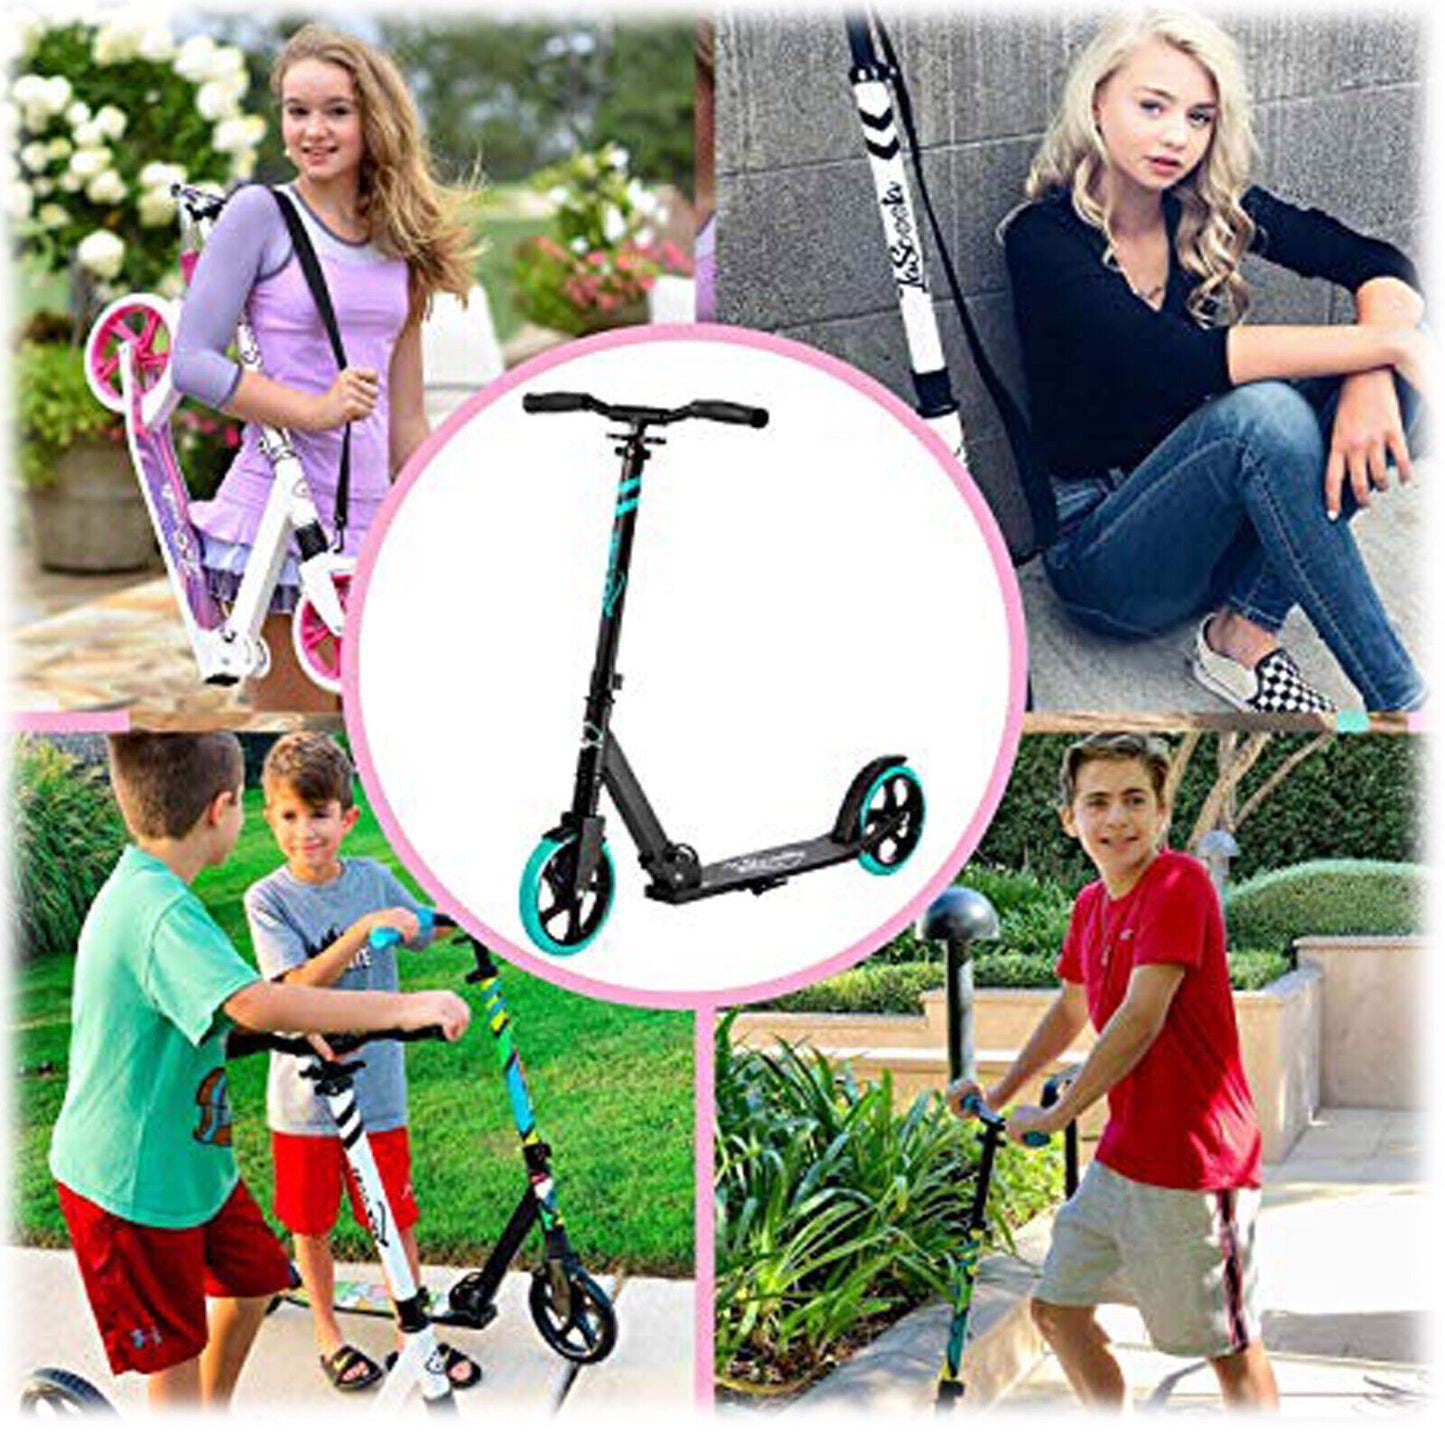 Plum Commuter Scooter: Sleek Pulse Kick Push Scooter for Teens and Adults